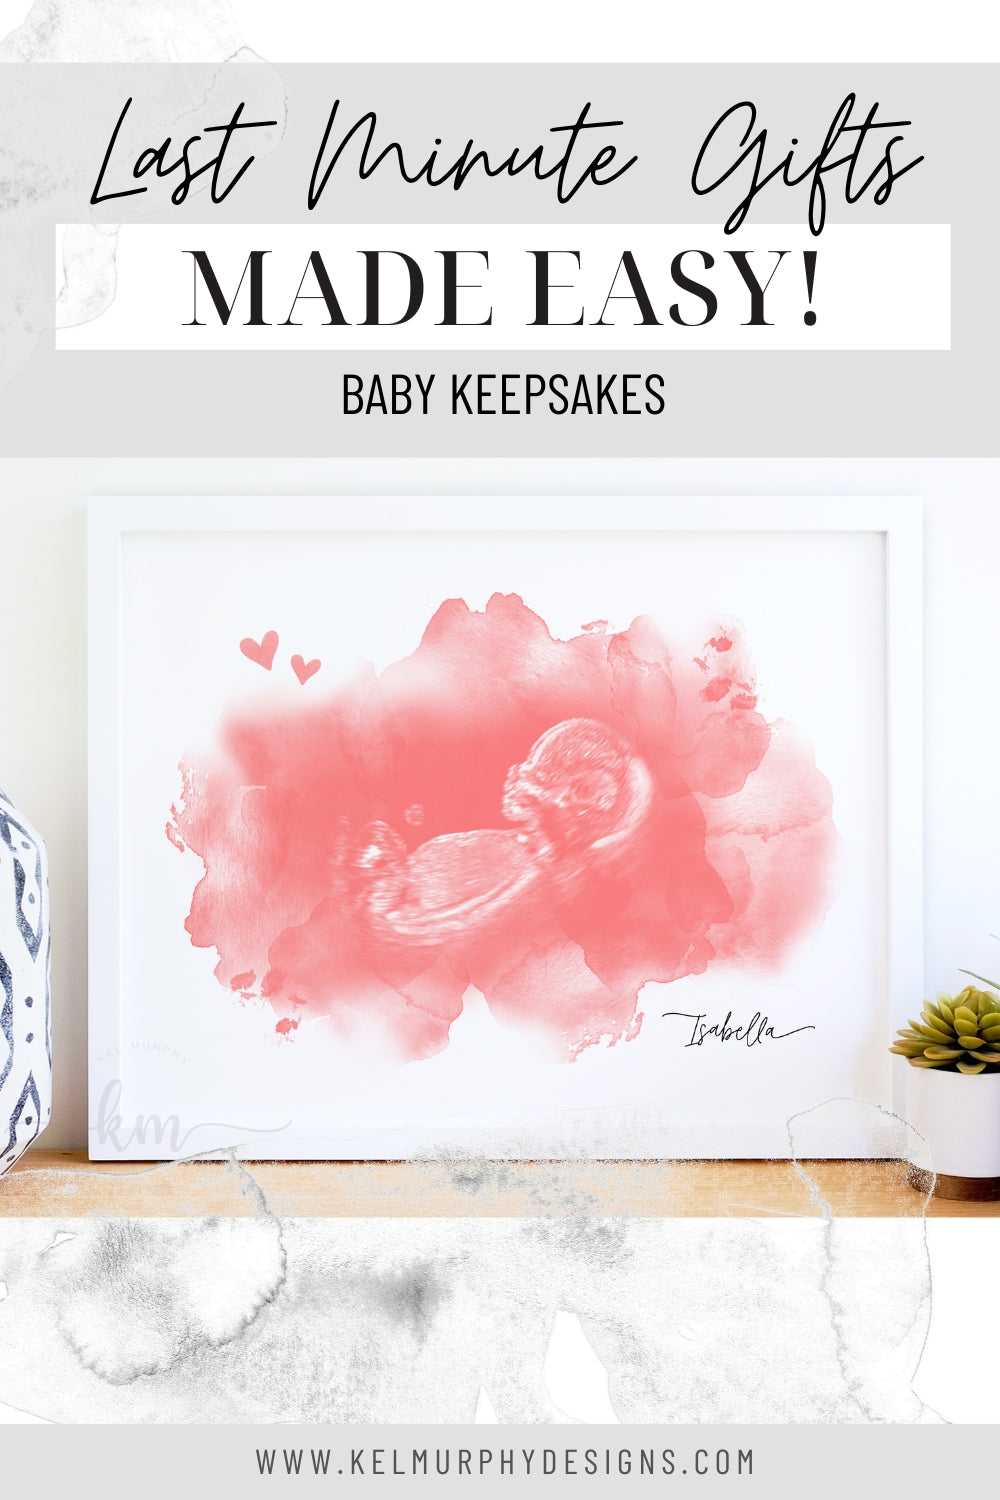 Last minute gifts made easy, baby keepsakes for Mother's Day, baby shower. Ultrasound art, embryo designs and footprint art